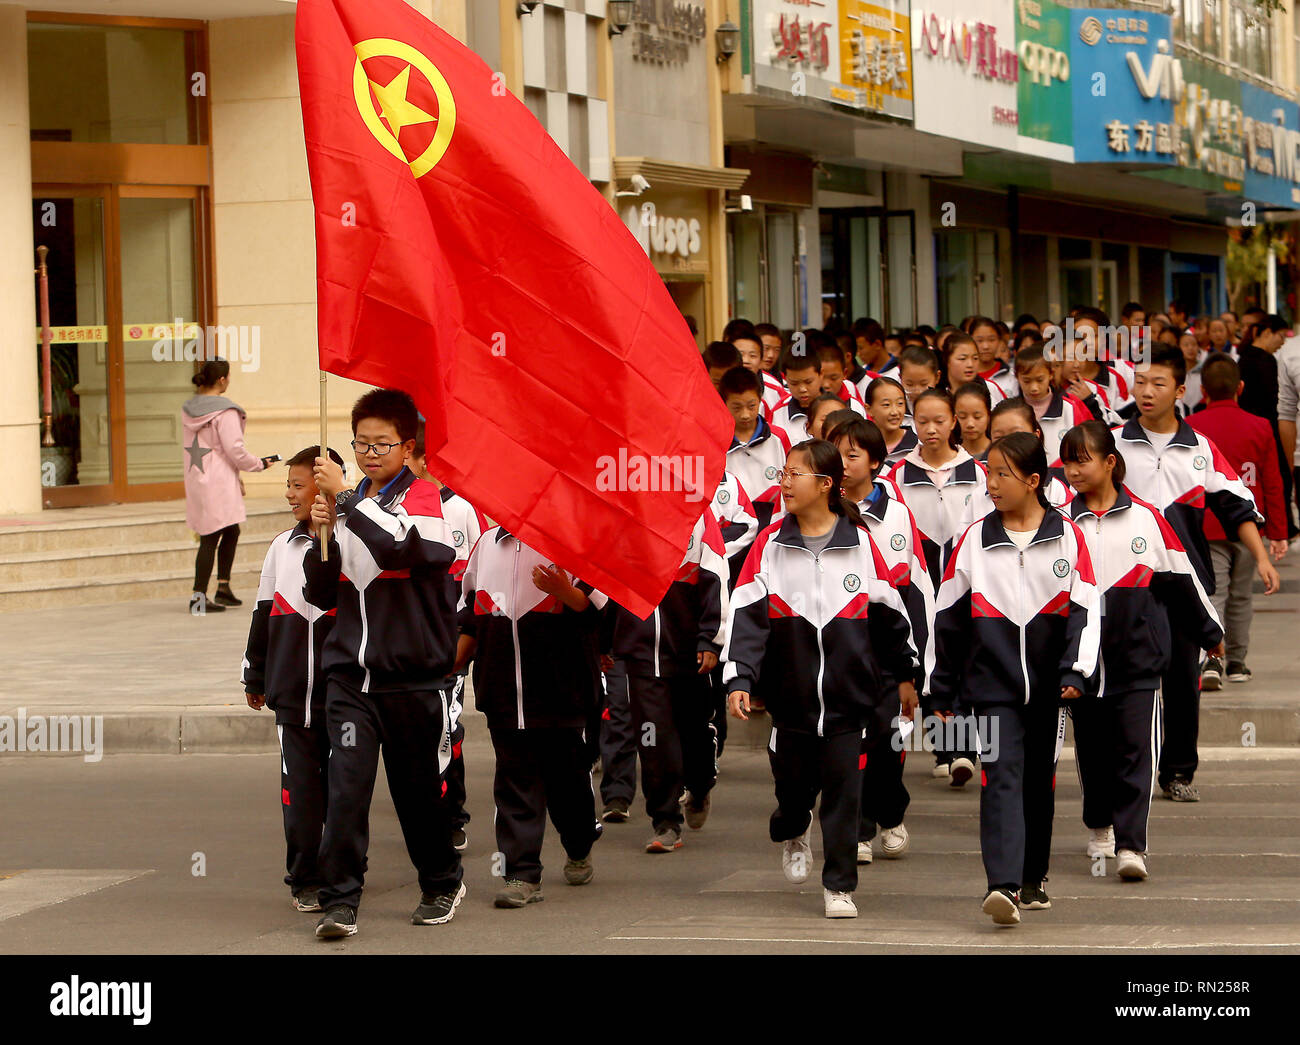 Dunhuang, Gansu, China. 30th Sep, 2018. Young Patriots, linked closely with the Communist Party, march down a sidewalk in Dunhuang, Gansu Province, on September 30, 2018. Public schools in China are highly influenced by Communist dogma and history, with students being taught and encouraged to embrace the principles of socialism. Credit: Stephen Shaver/ZUMA Wire/Alamy Live News Stock Photo